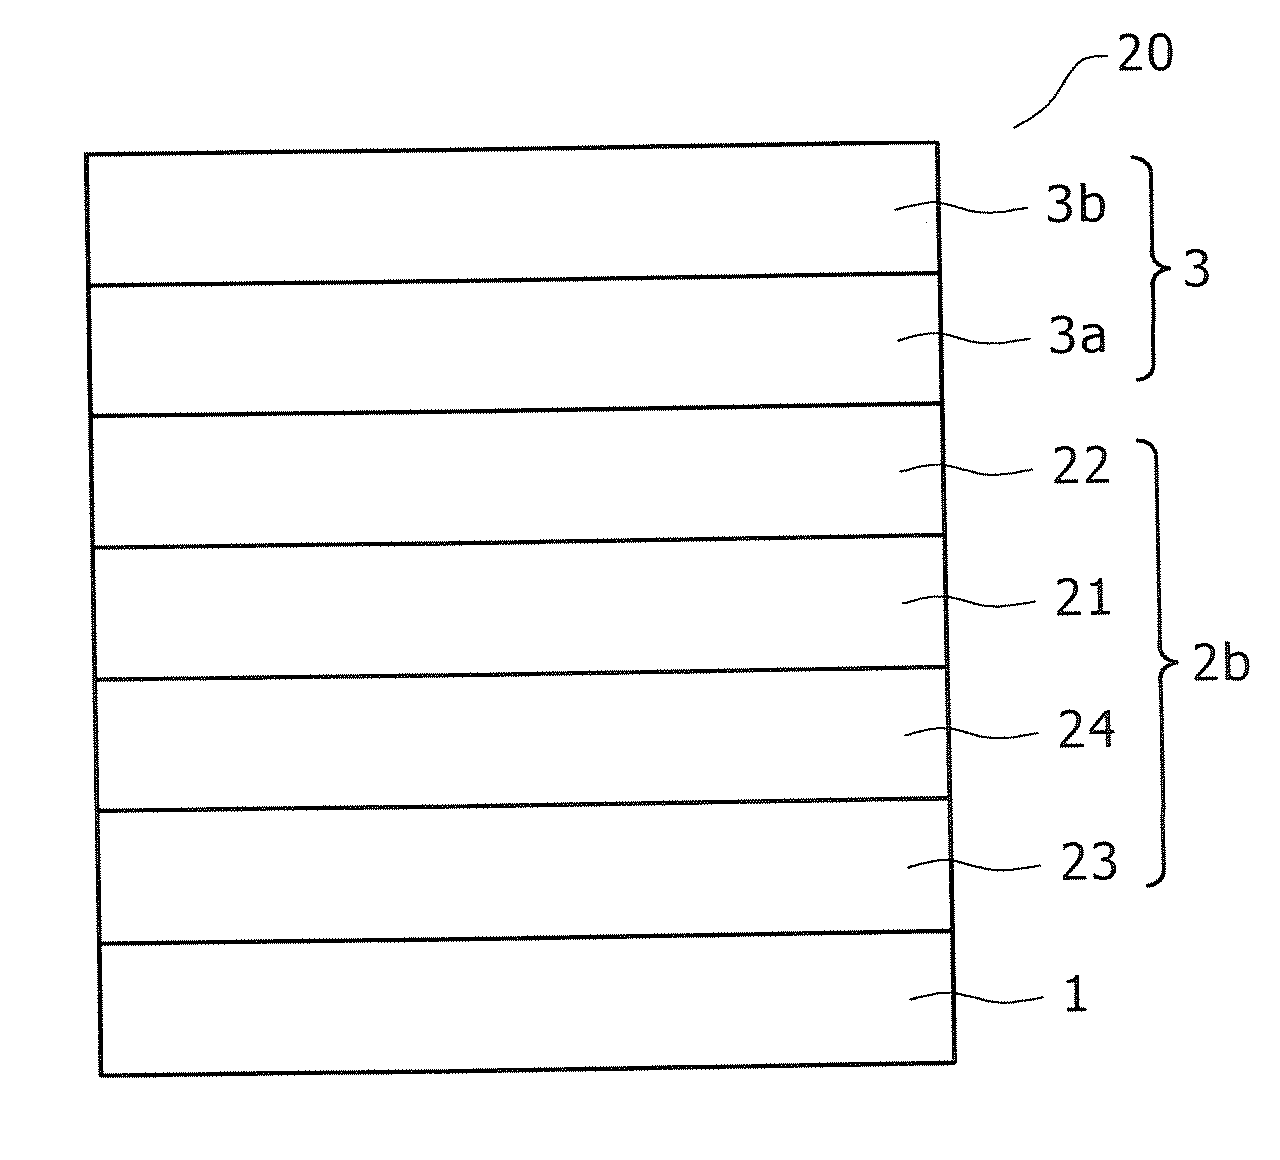 Diamondlike carbon hard multilayer film formed body and method for producing the same